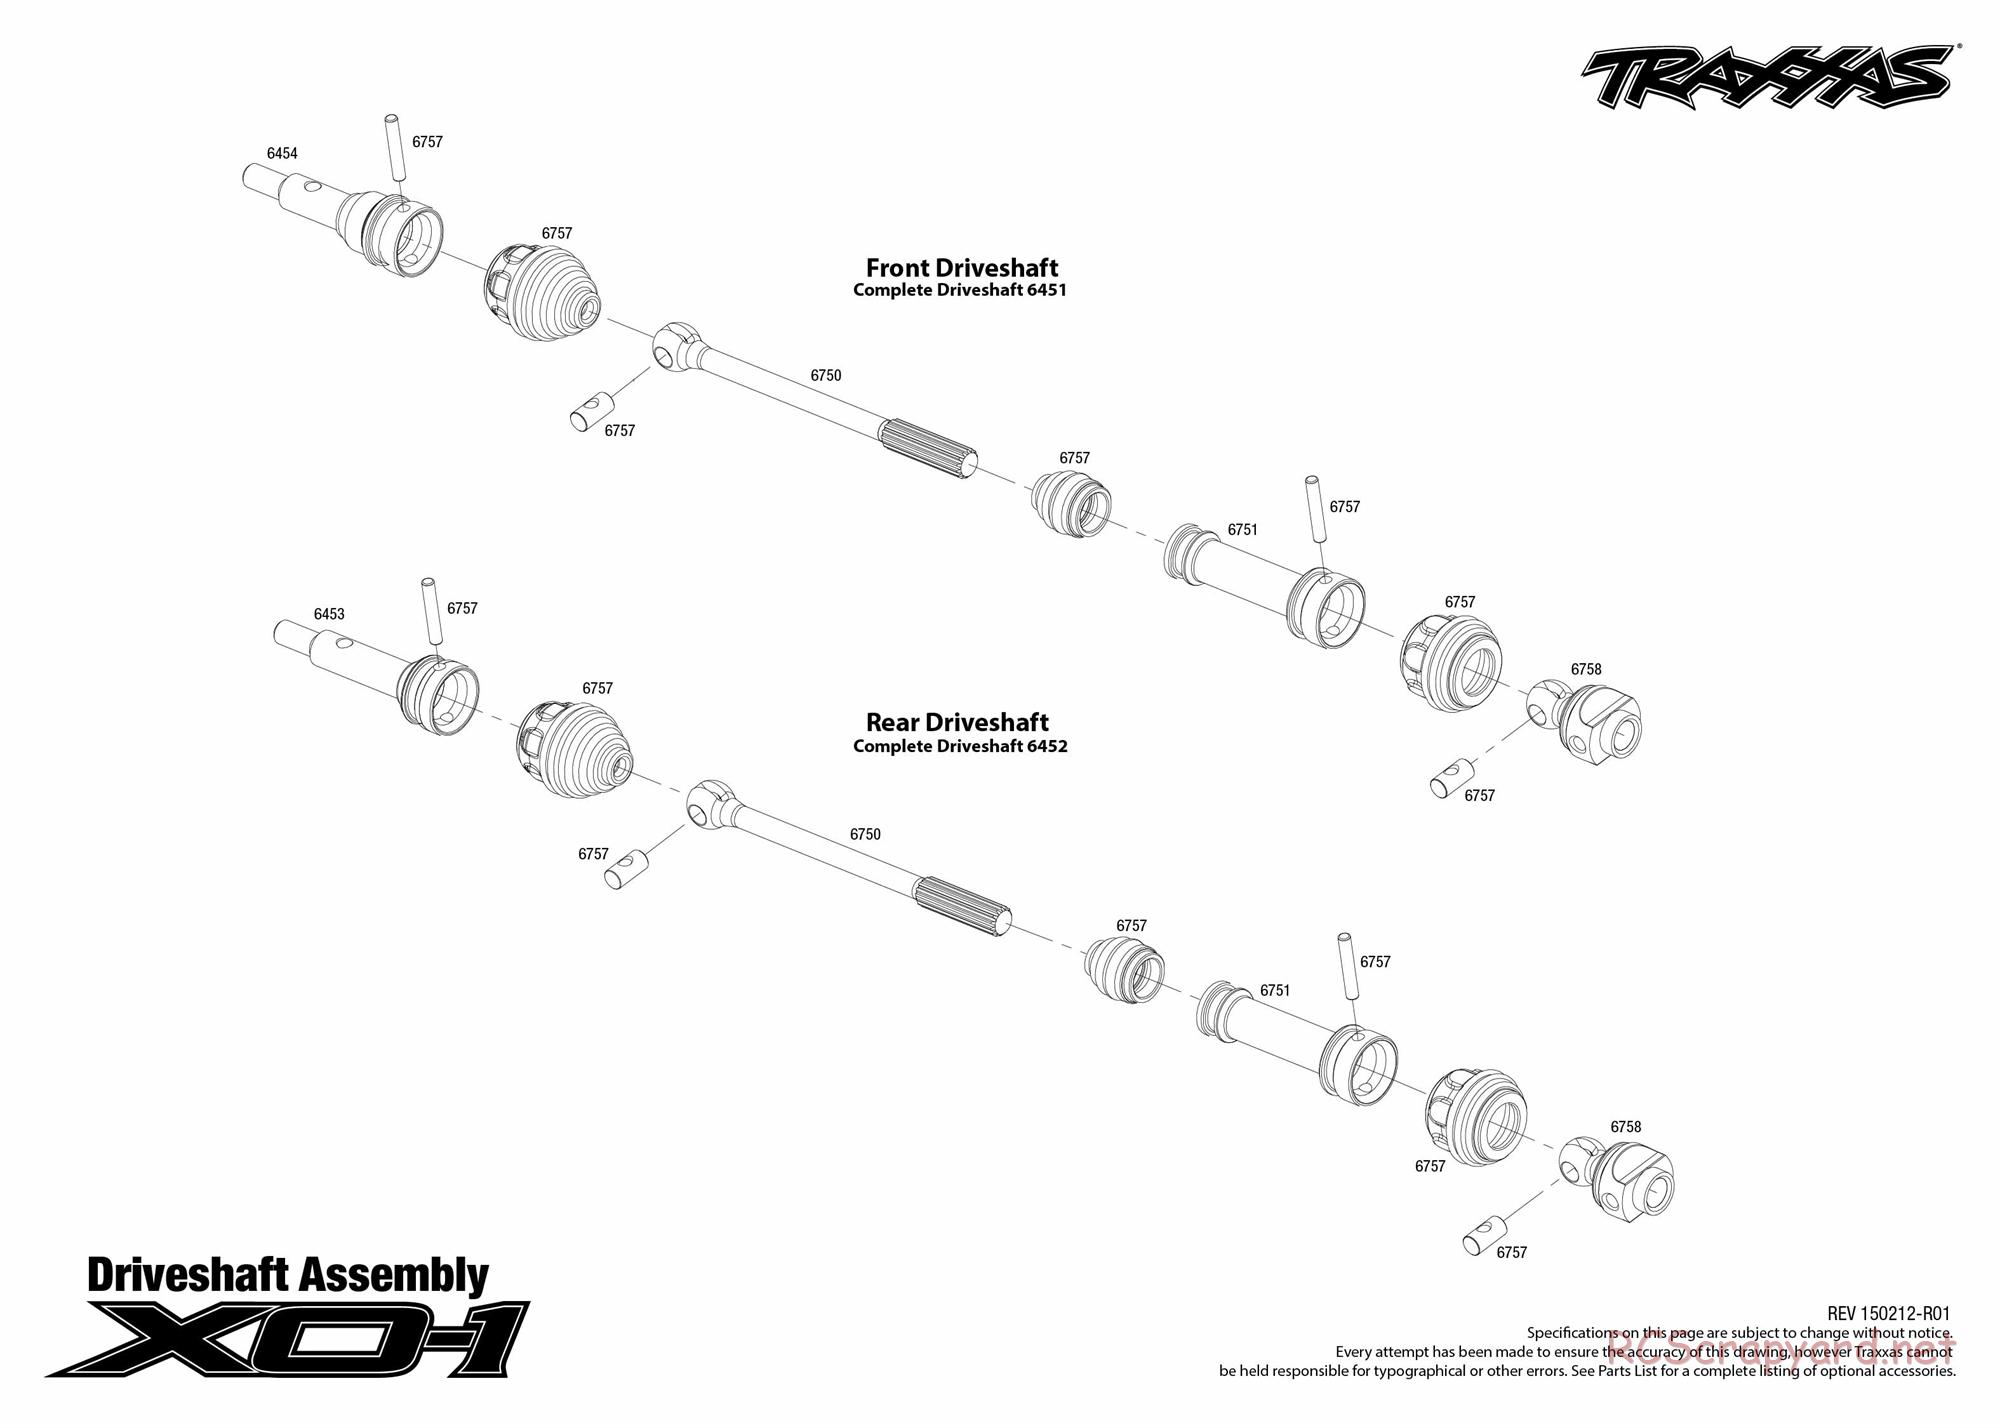 Traxxas - XO-1 (2014) - Exploded Views - Page 3